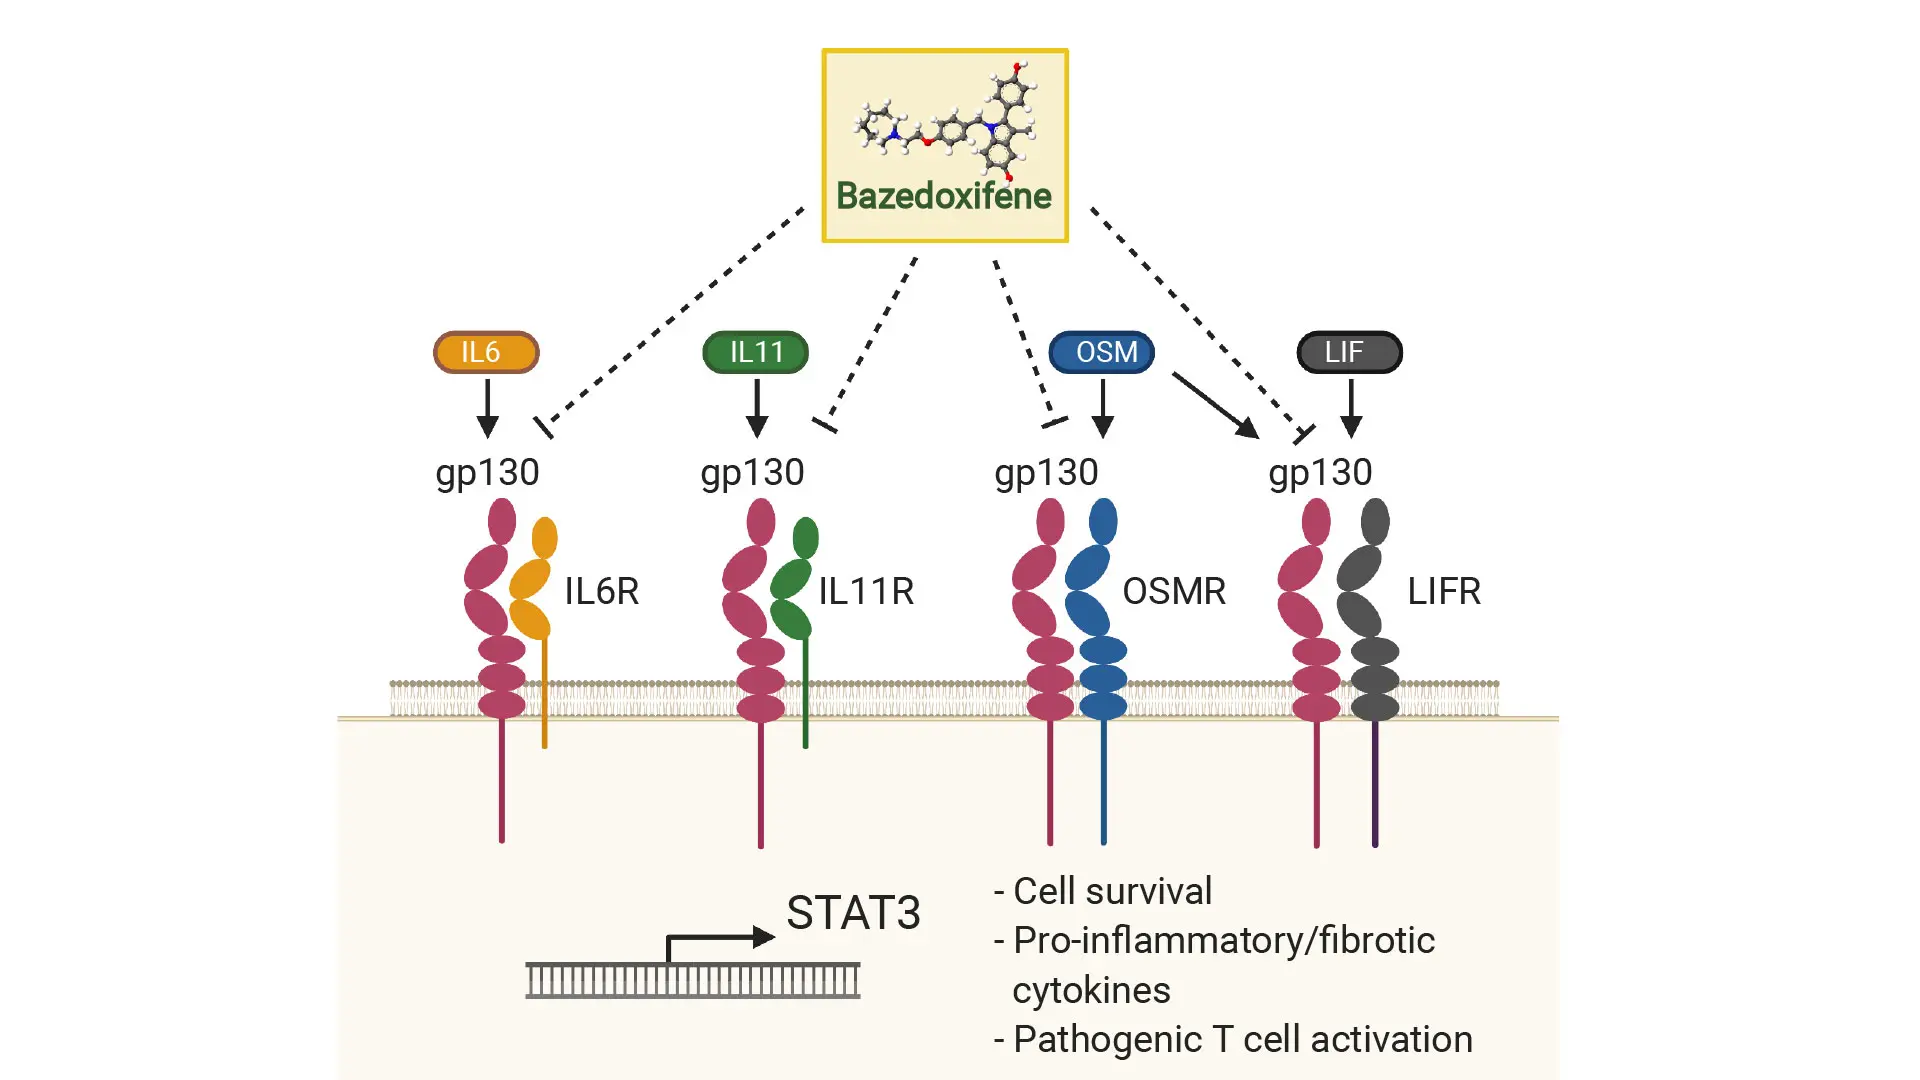 As shown here, gp130 is a common receptor for its family of receptor genes (IL6R, IL11R, LIFR, OSMR). To resolve cellular activation in Crohn's disease, bazedoxifene, a U.S. Food and Drug Administration-approved drug, could effectively inhibit gp130 and its partner receptors and potentially serve as a complementary treatment for patients who do not respond to anti-TNF therapy. 